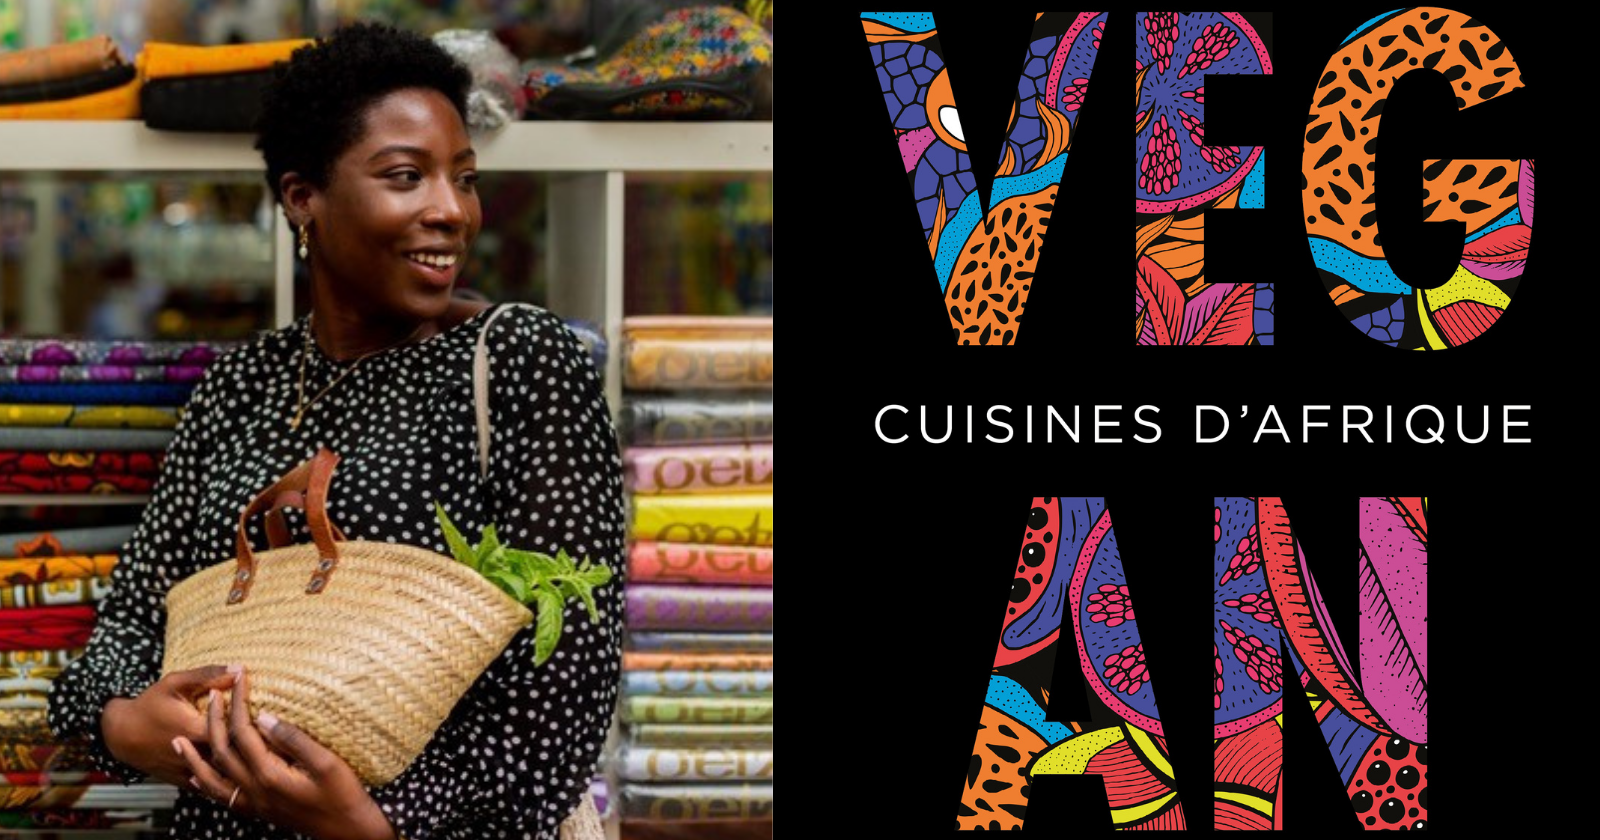 With her book "Cuisines d'Afrique" chef Marie Kacouchia introduces us to Afro-veganism